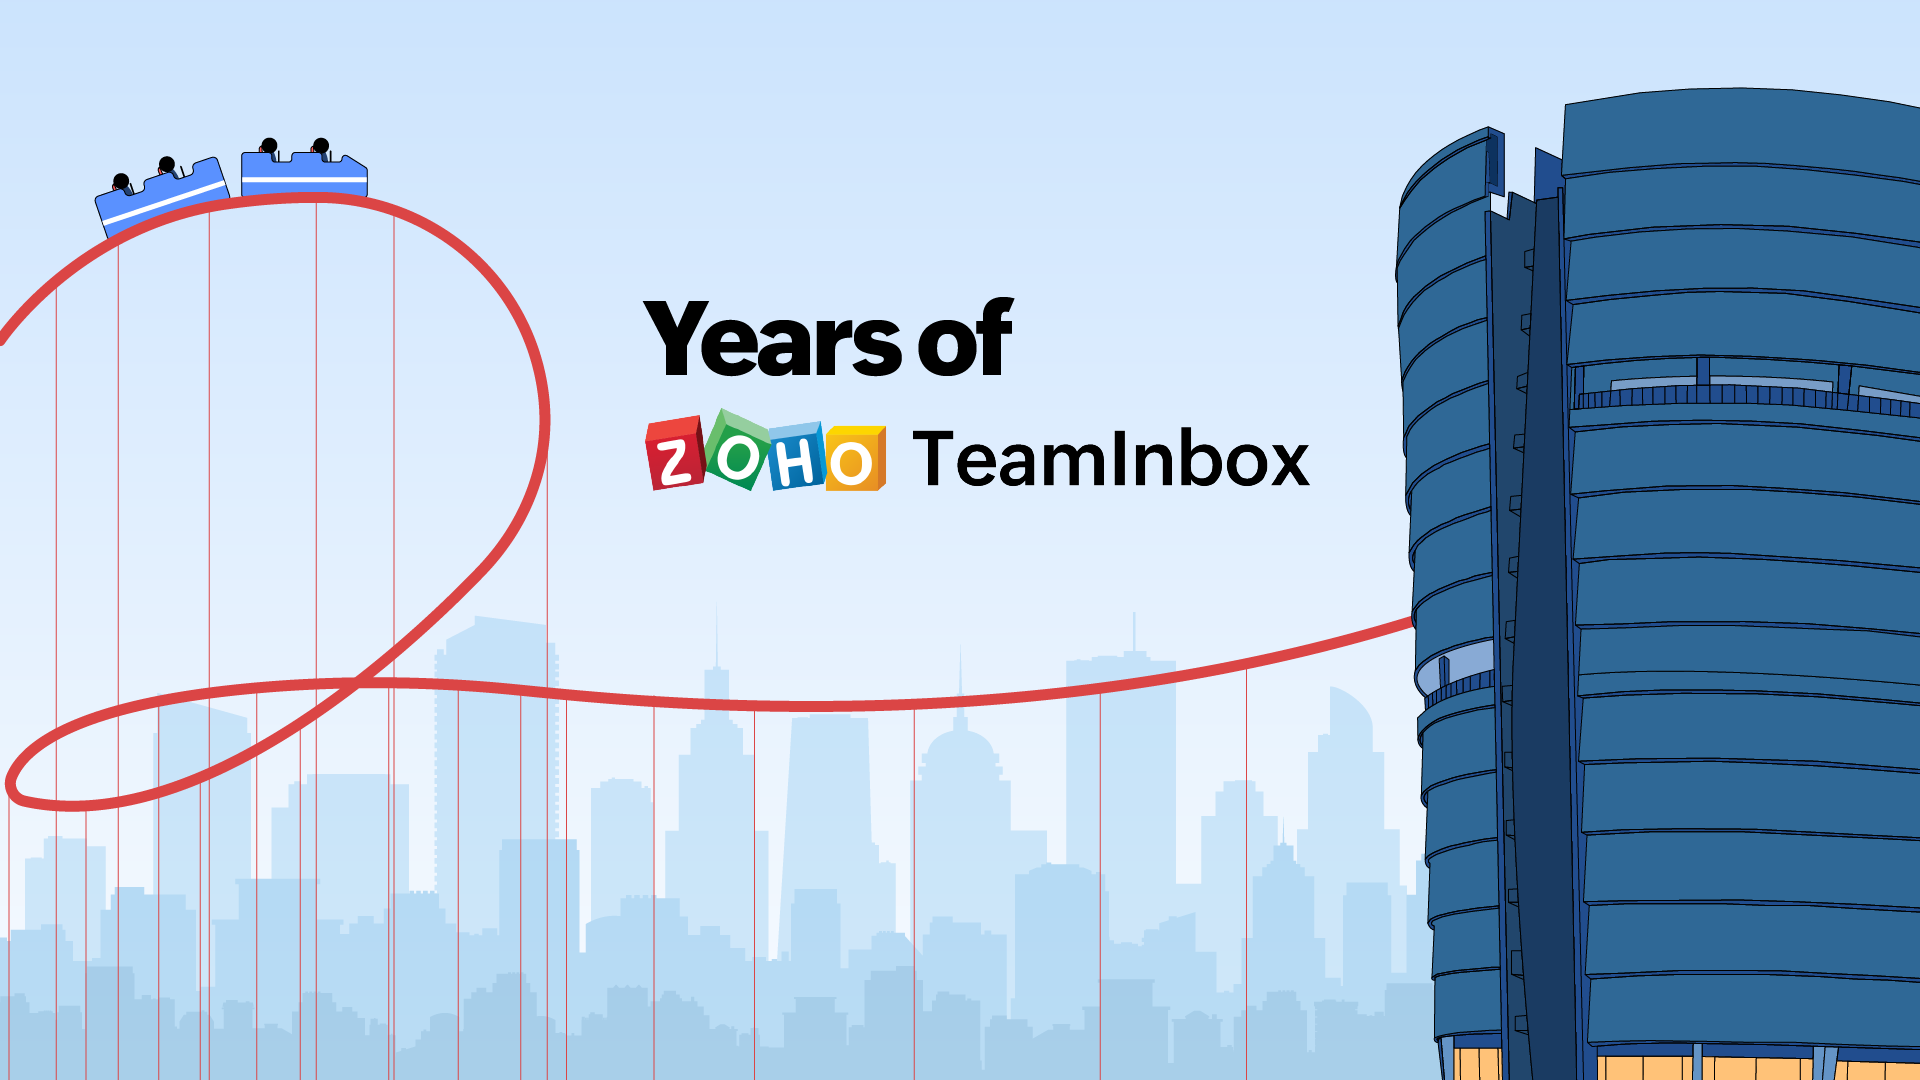 Two years of Zoho TeamInbox—and miles yet to go!